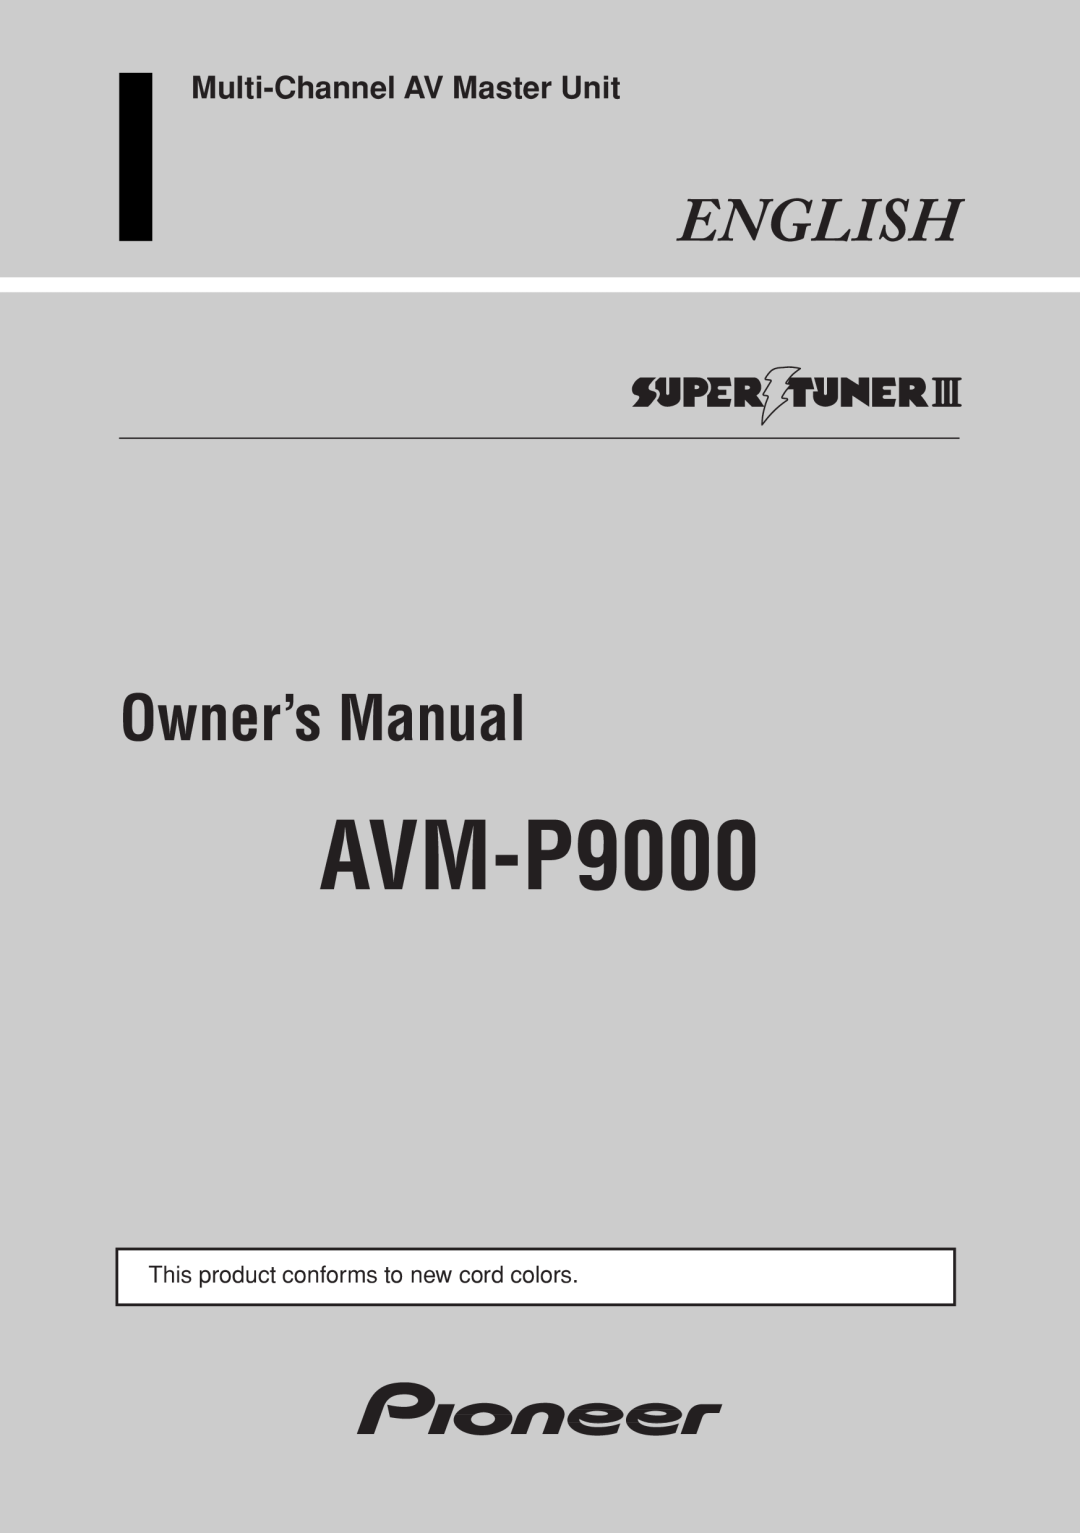 Pioneer AVM-P9000 owner manual English, Owner’s Manual, Multi-ChannelAV Master Unit 